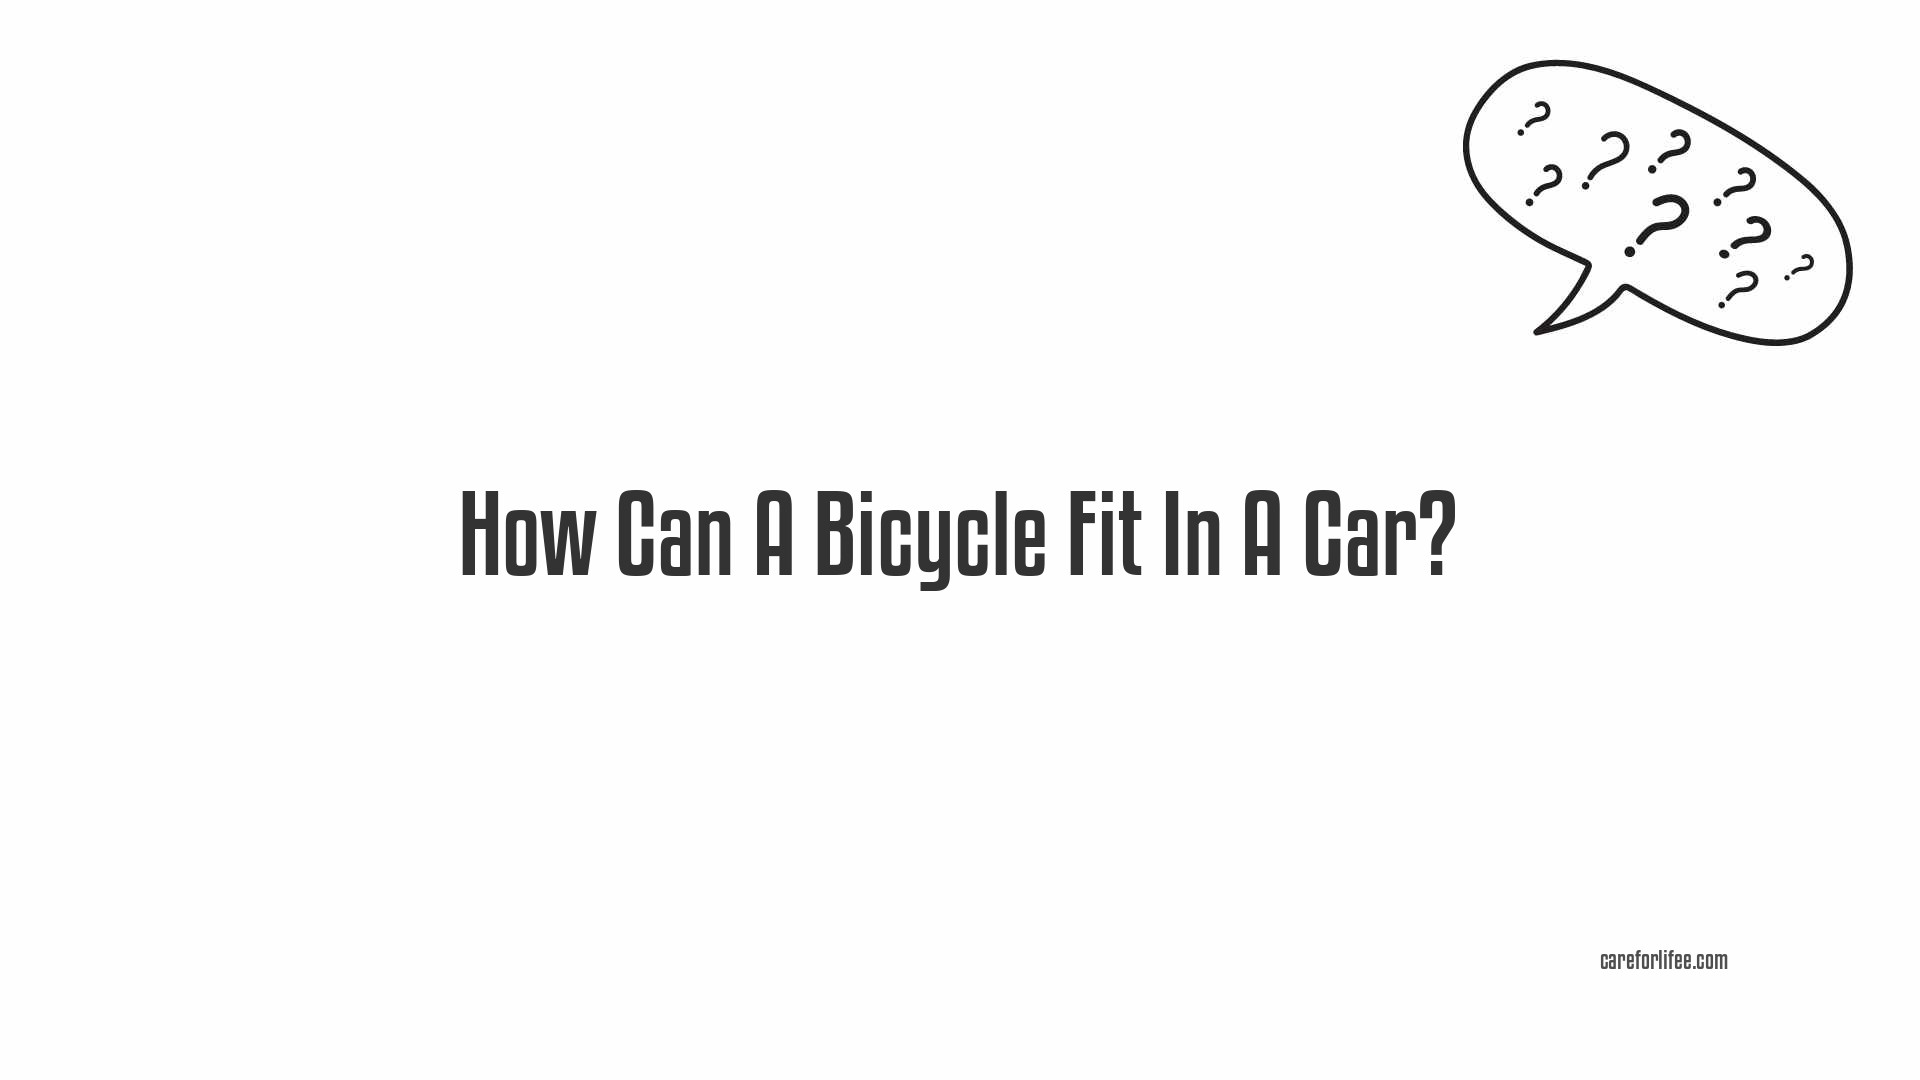 How Can A Bicycle Fit In A Car?